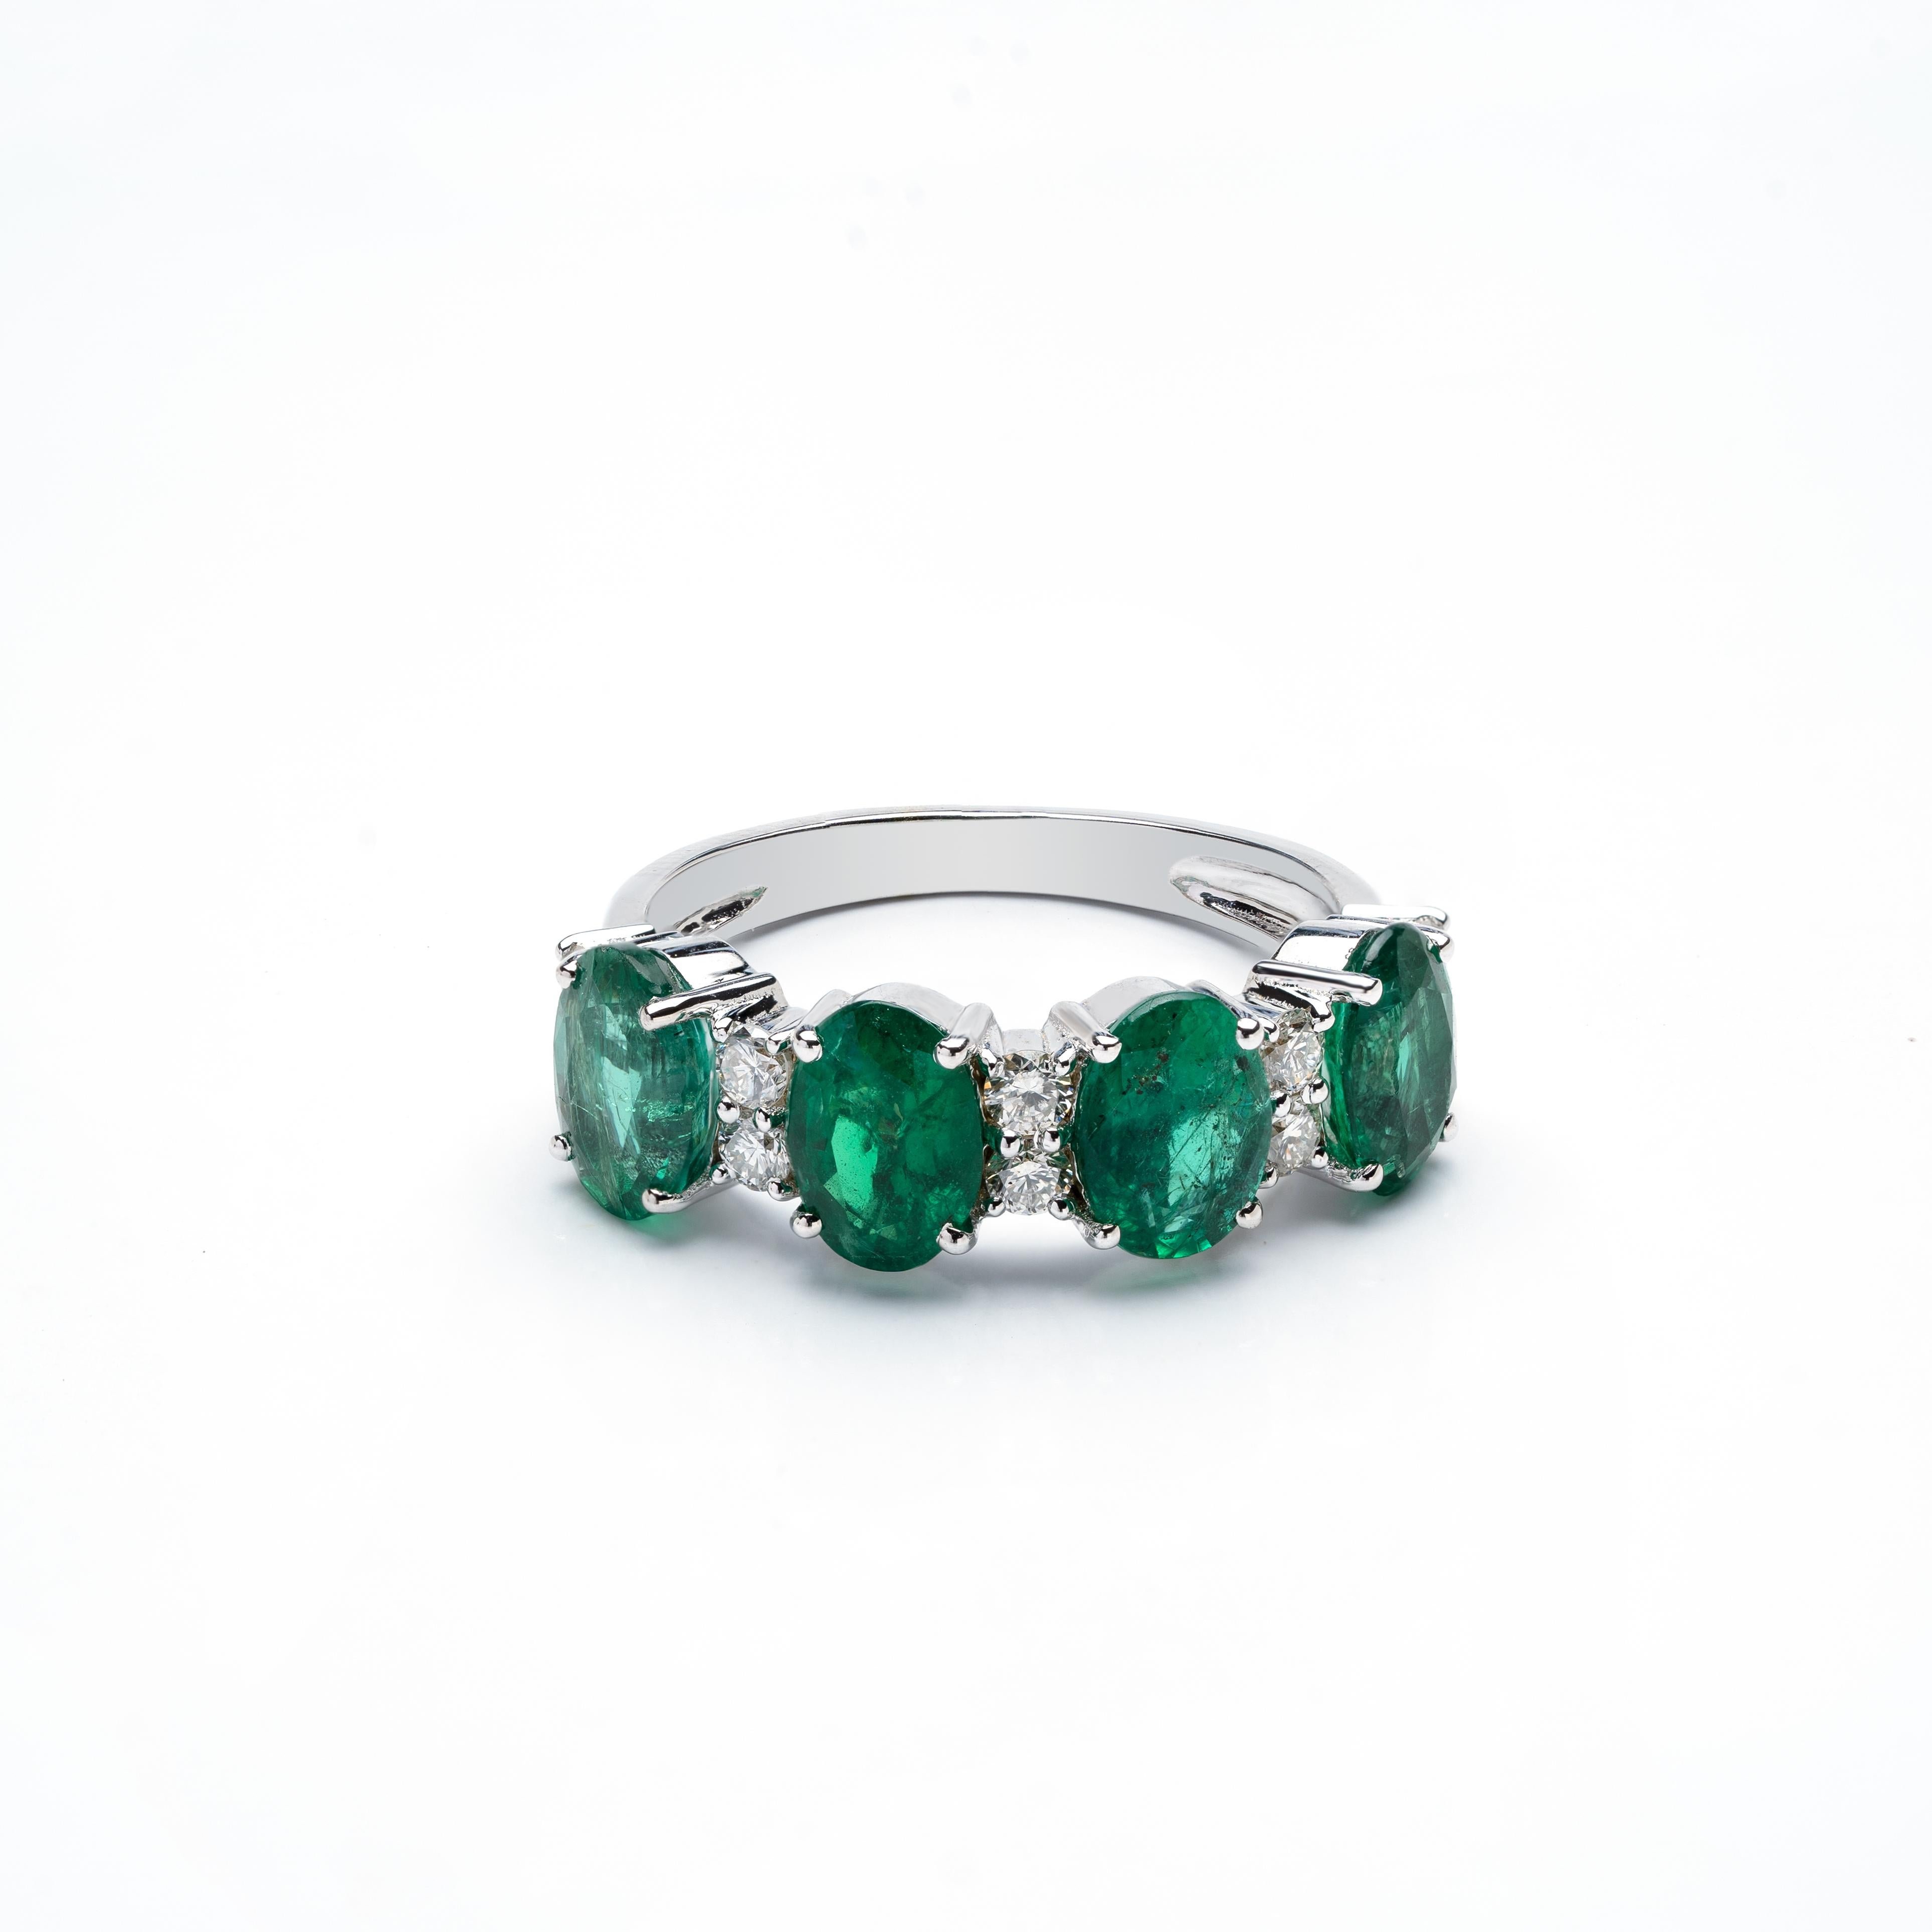 
Natural Zambian Emerald ring

 3 Carats of emeralds  
 1.05 Cents of Diamonds

Emeralds are of very high quality. It's a brand new piece.

It’s very hard to capture the true color and luster of the stone, I have tried to add pictures which are